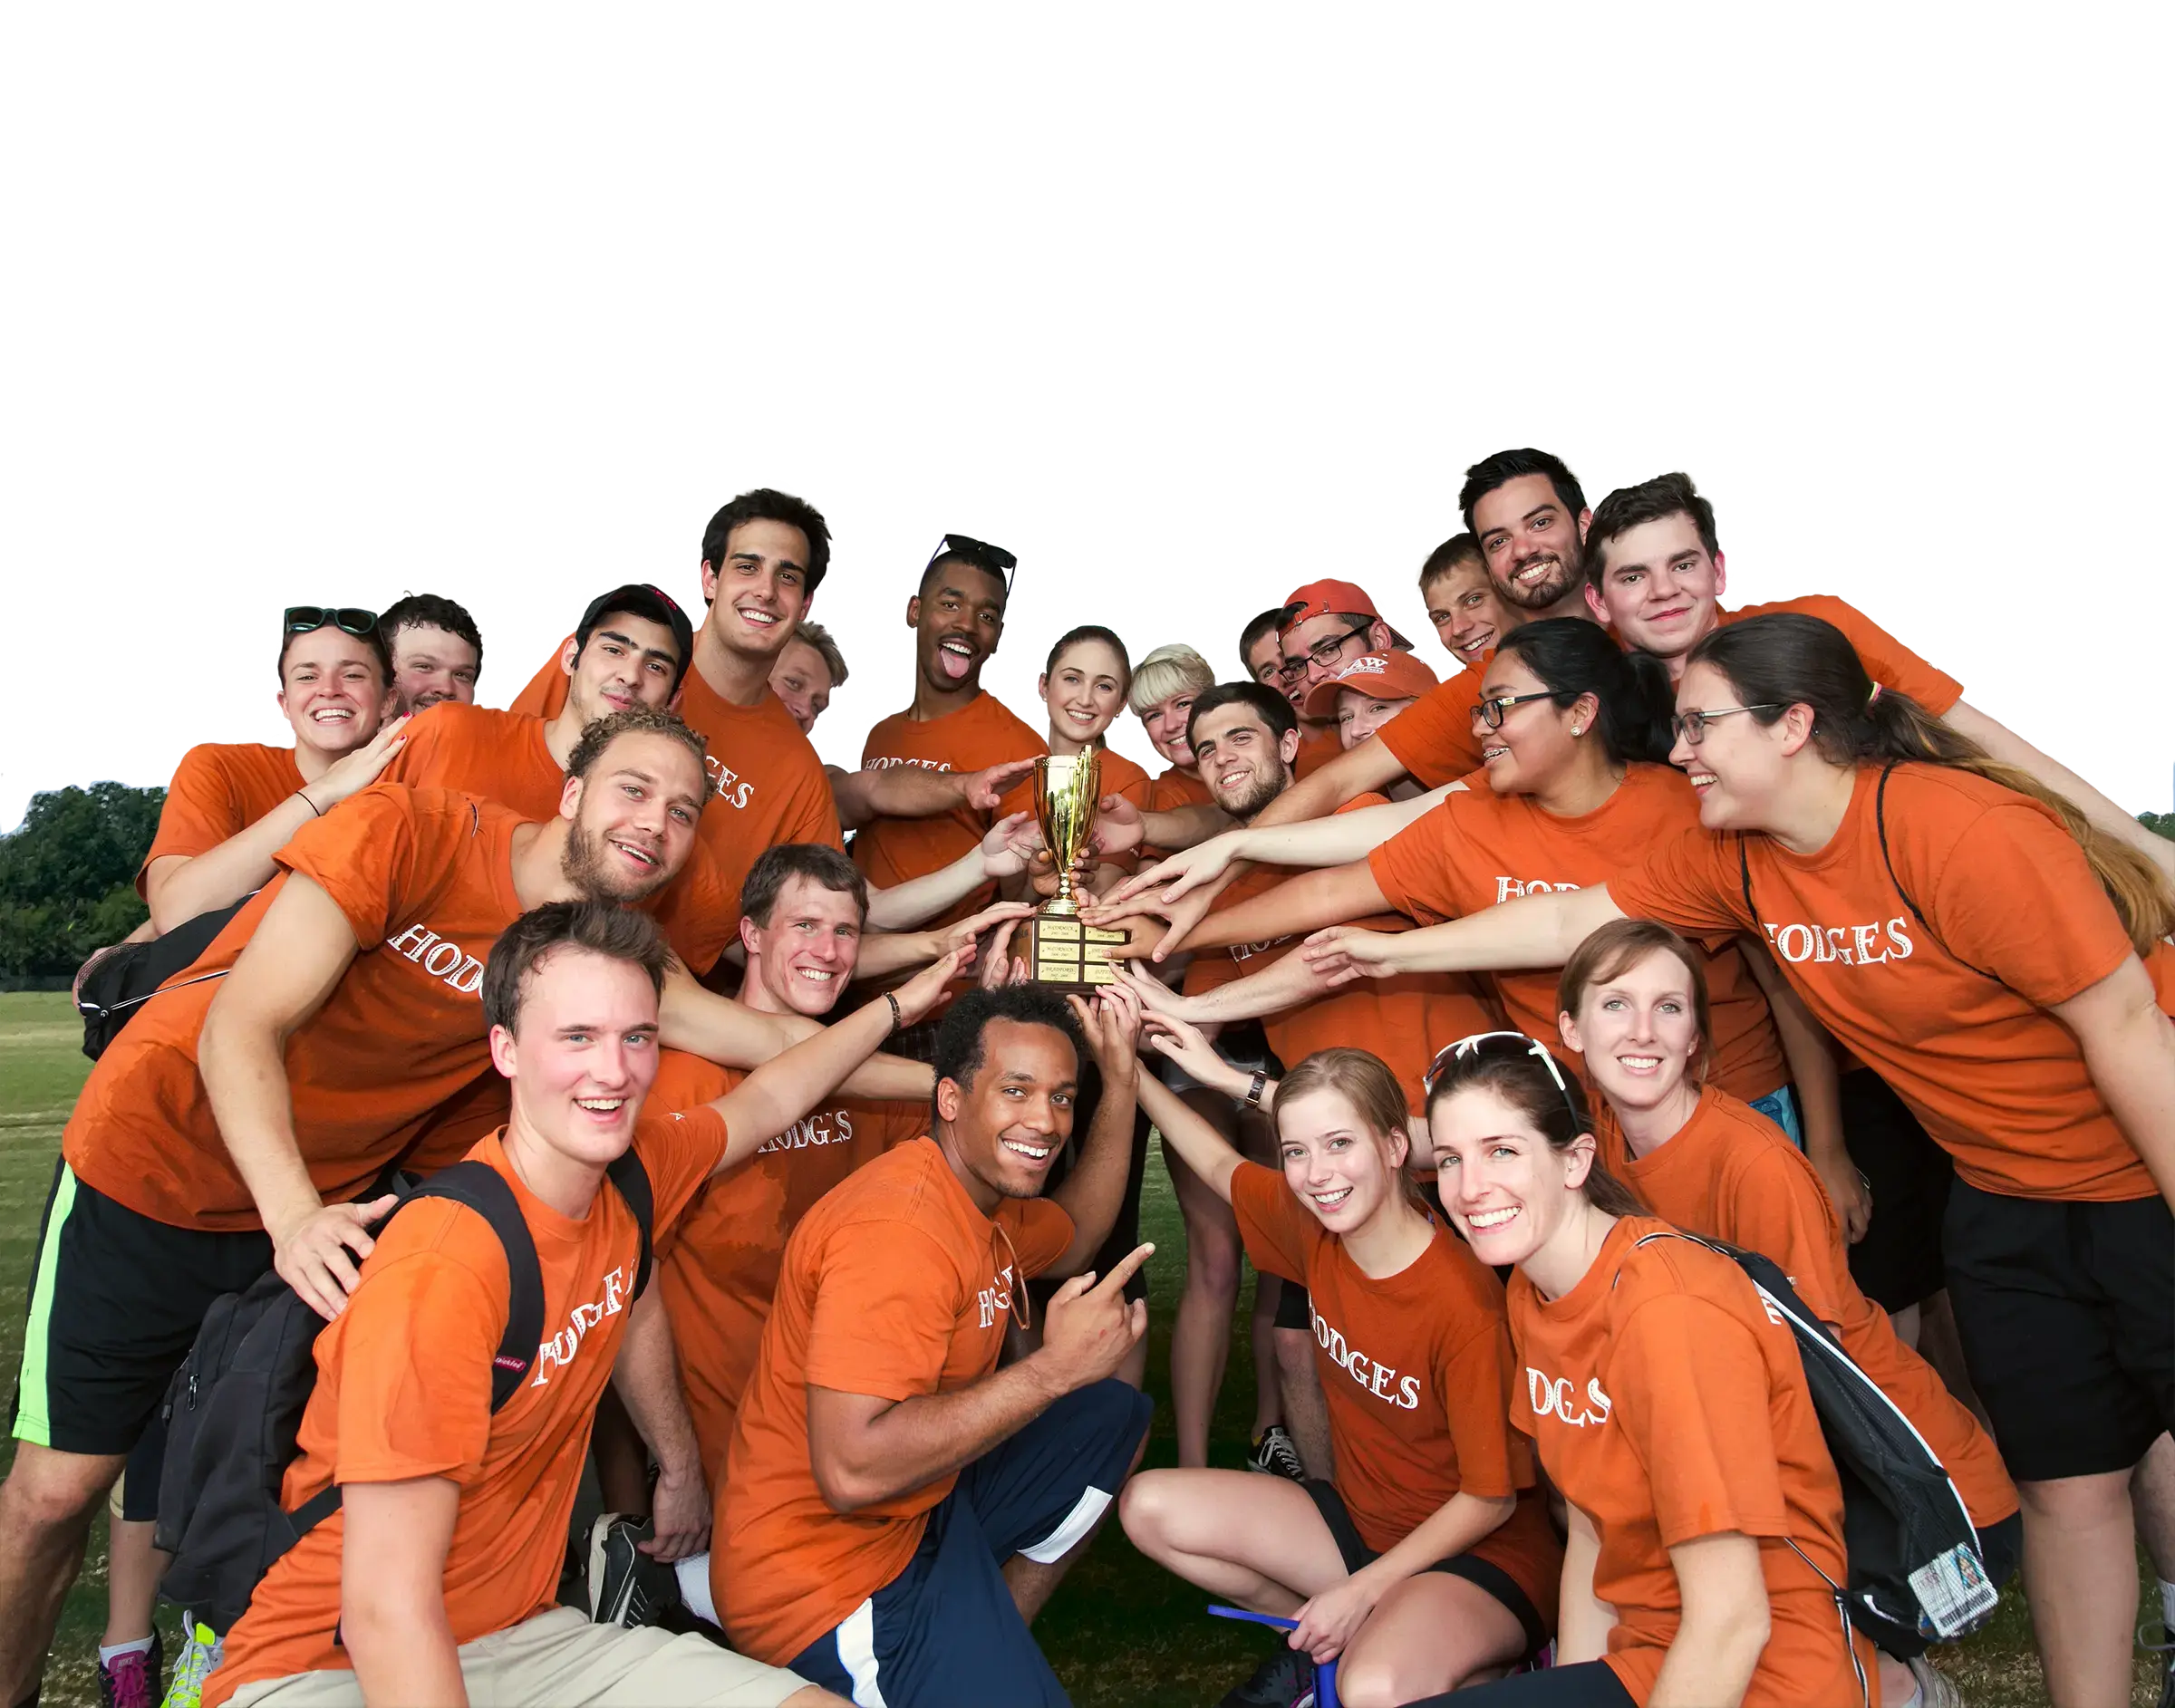 On a soccer field, law students, all wearing burnt orange t-shirts, pose in a huddle around a gold trophy